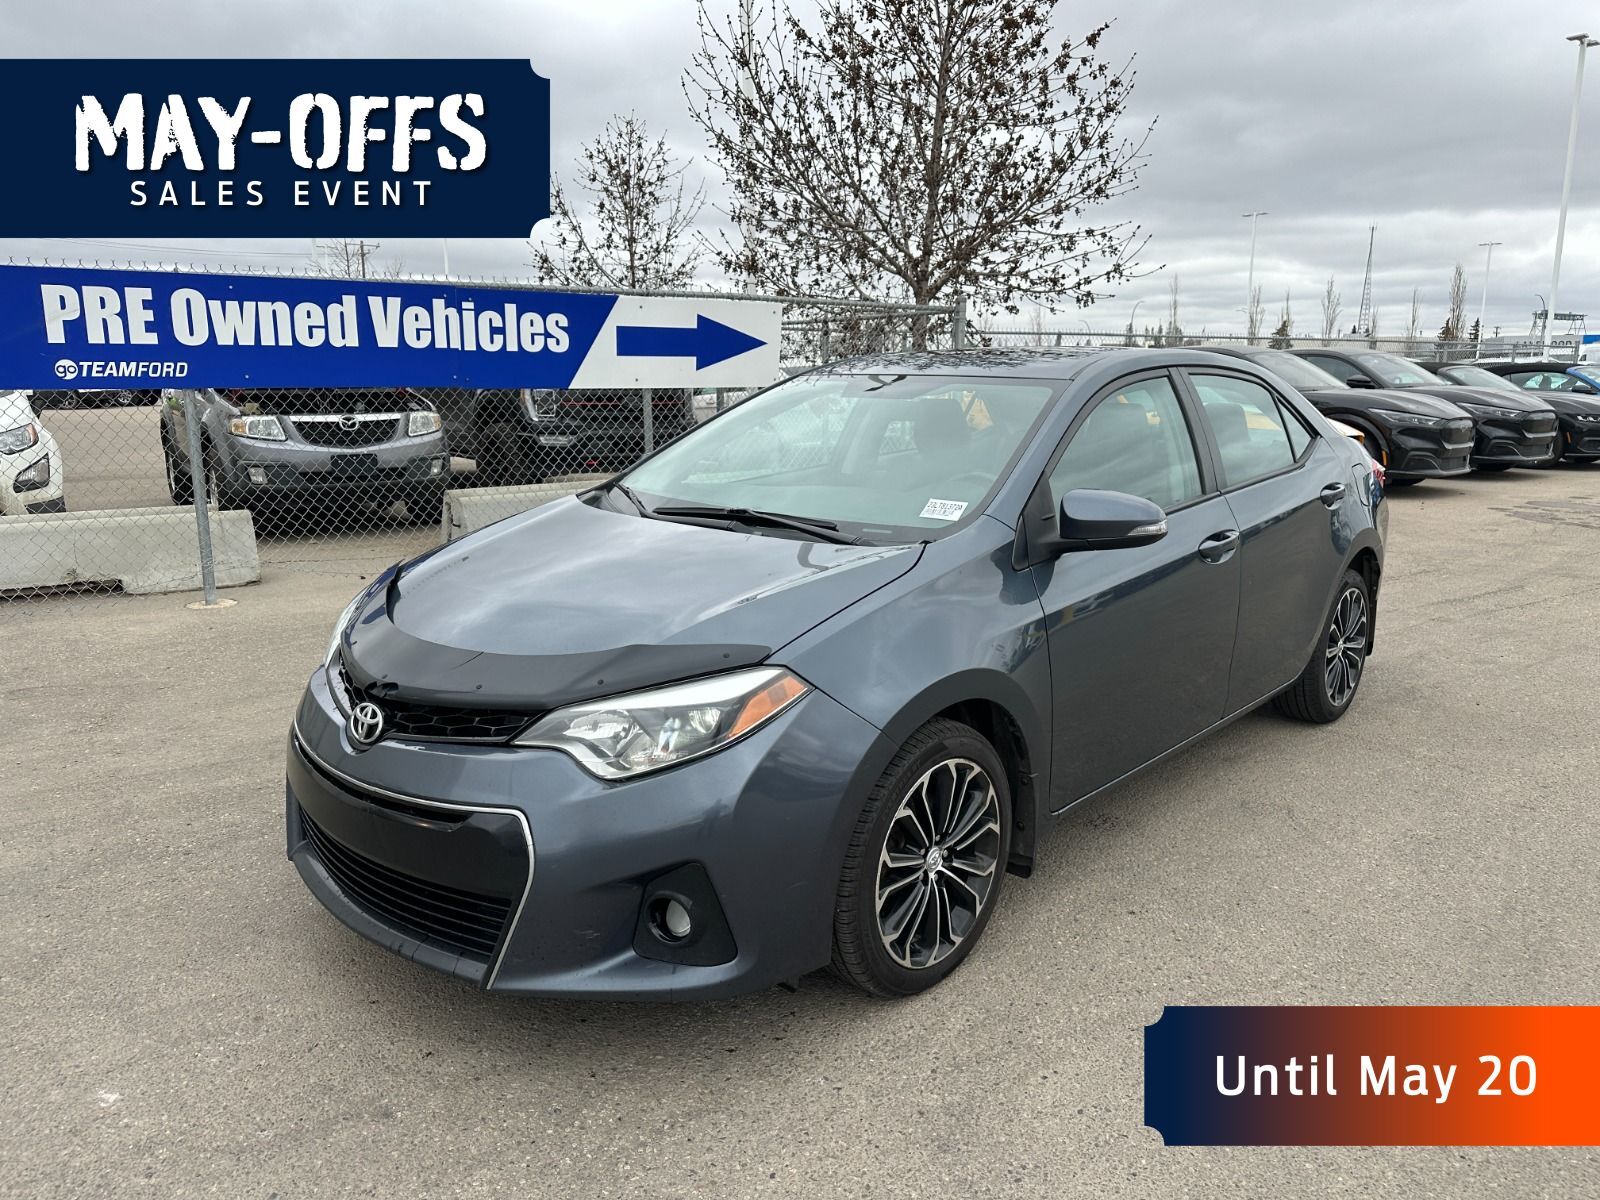 2016 Toyota Corolla CE - AUTO, CRUISE, POWER OPTIONS AND MUCH MORE!